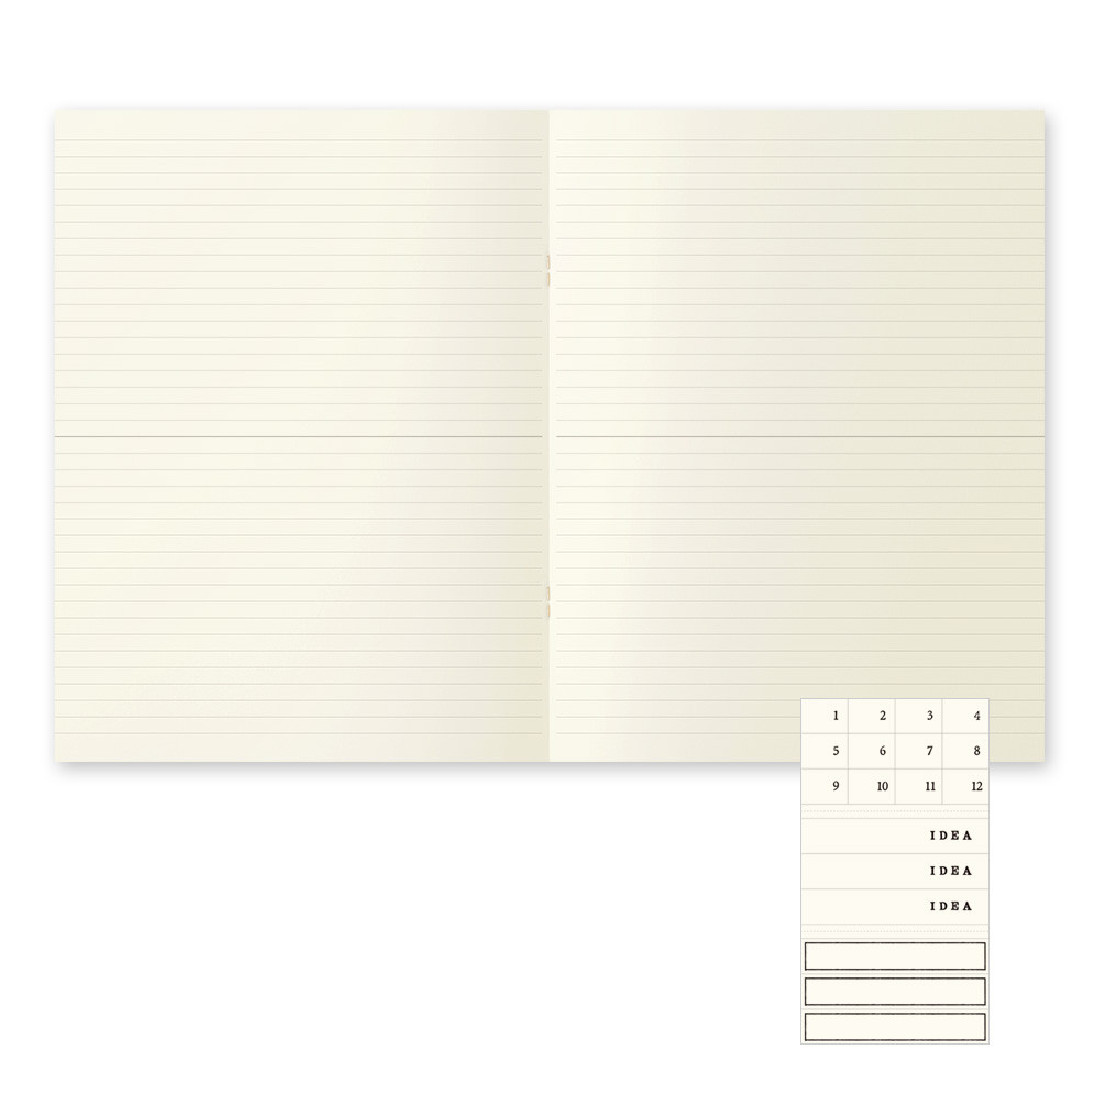 Midori MD Notebook Light A4 210 x 290mm, Lined, 3pcs pack, Label stickers, Saddle Stitched, 48 pages each, 15307006